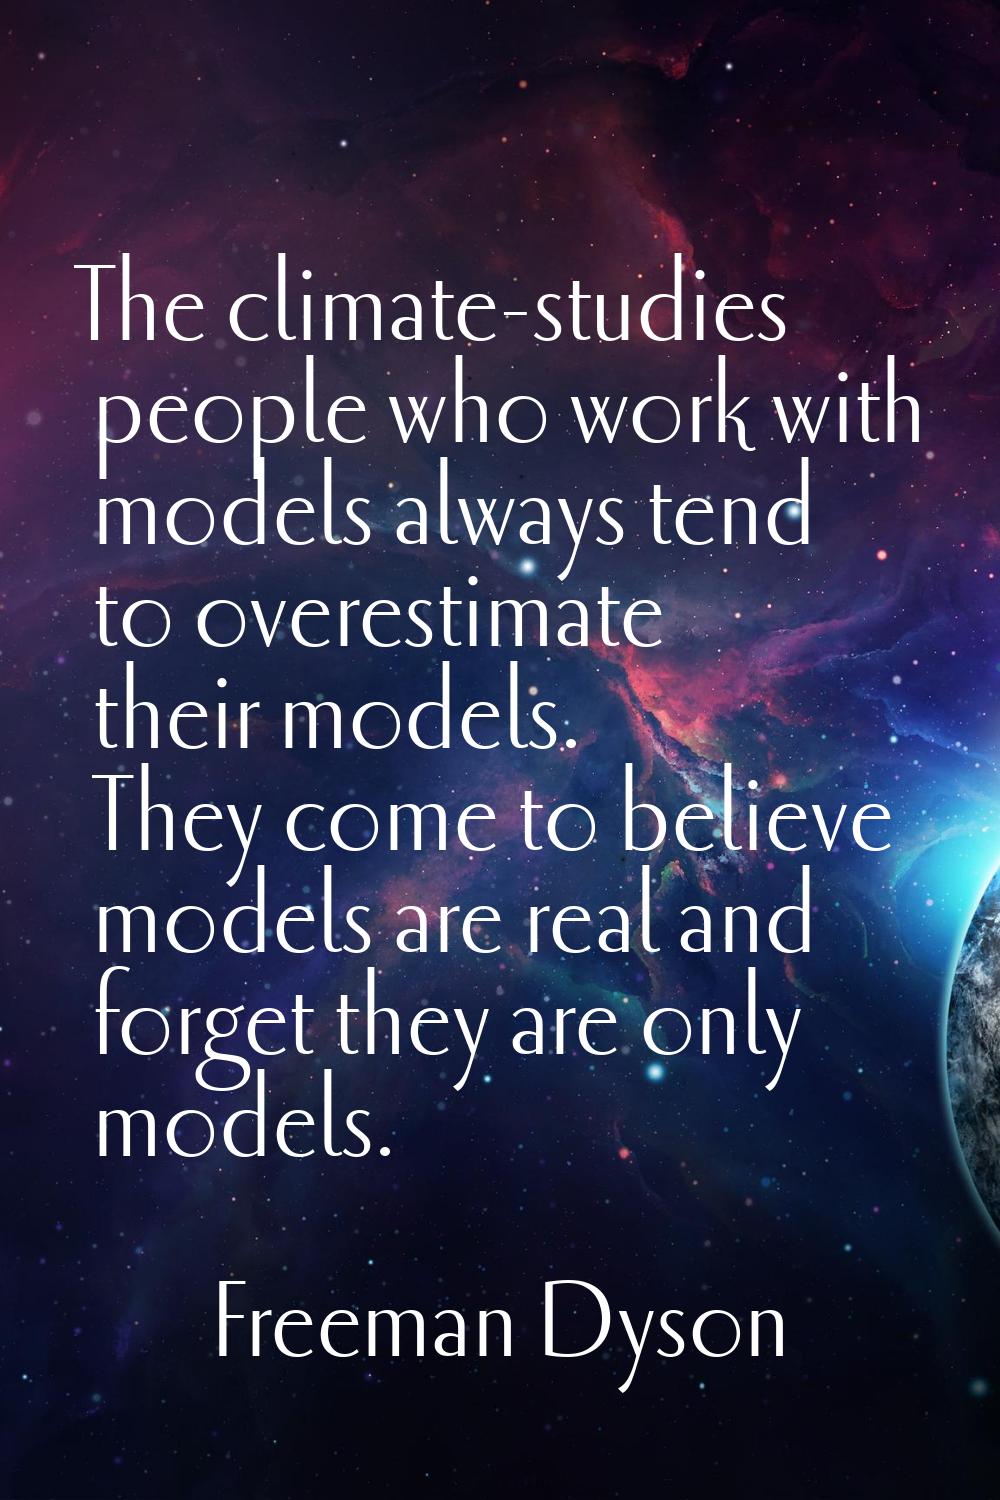 The climate-studies people who work with models always tend to overestimate their models. They come